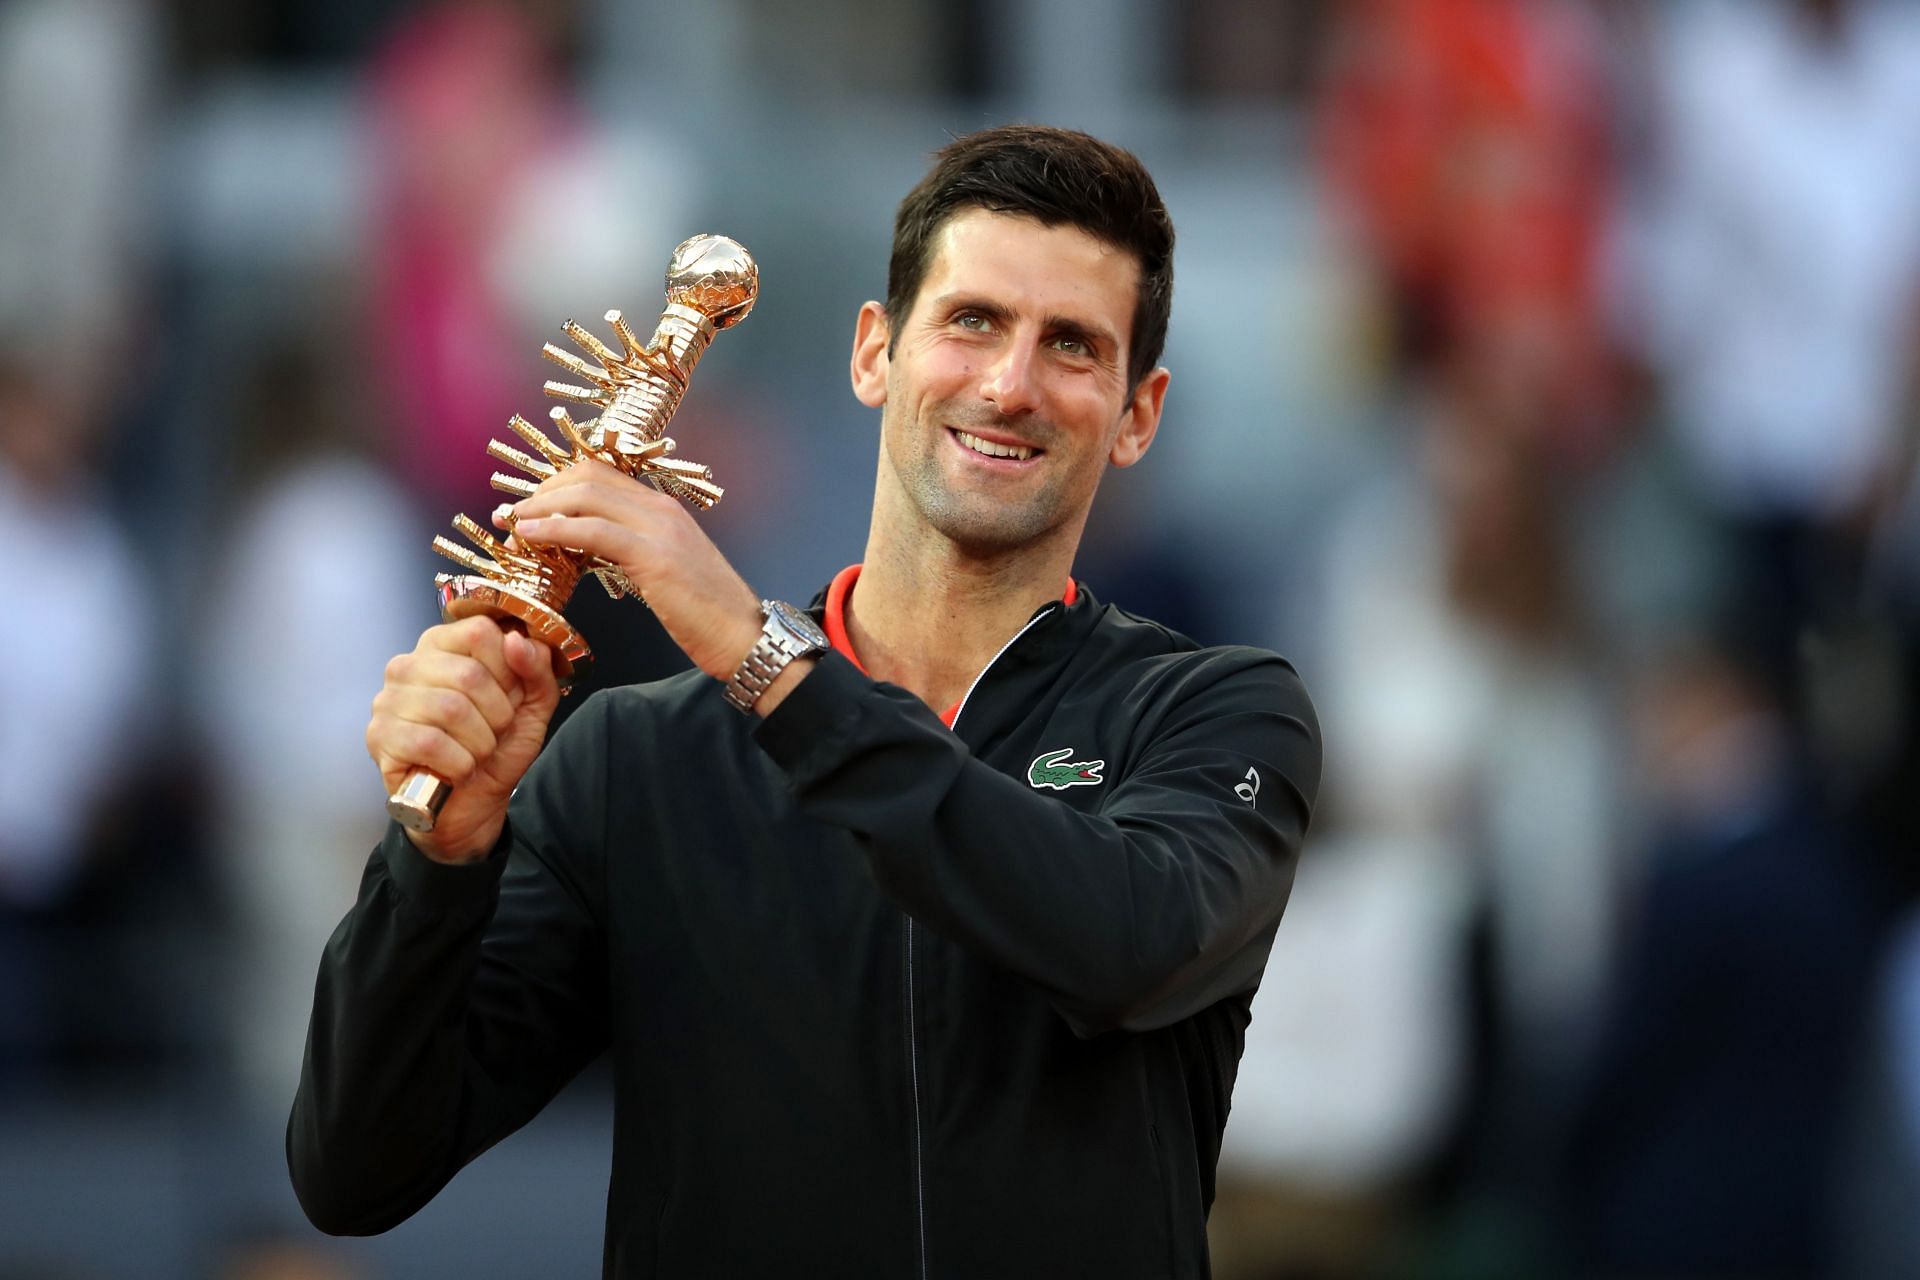 Novak Djokovic pictured with the 2019 Madrid Open trophy